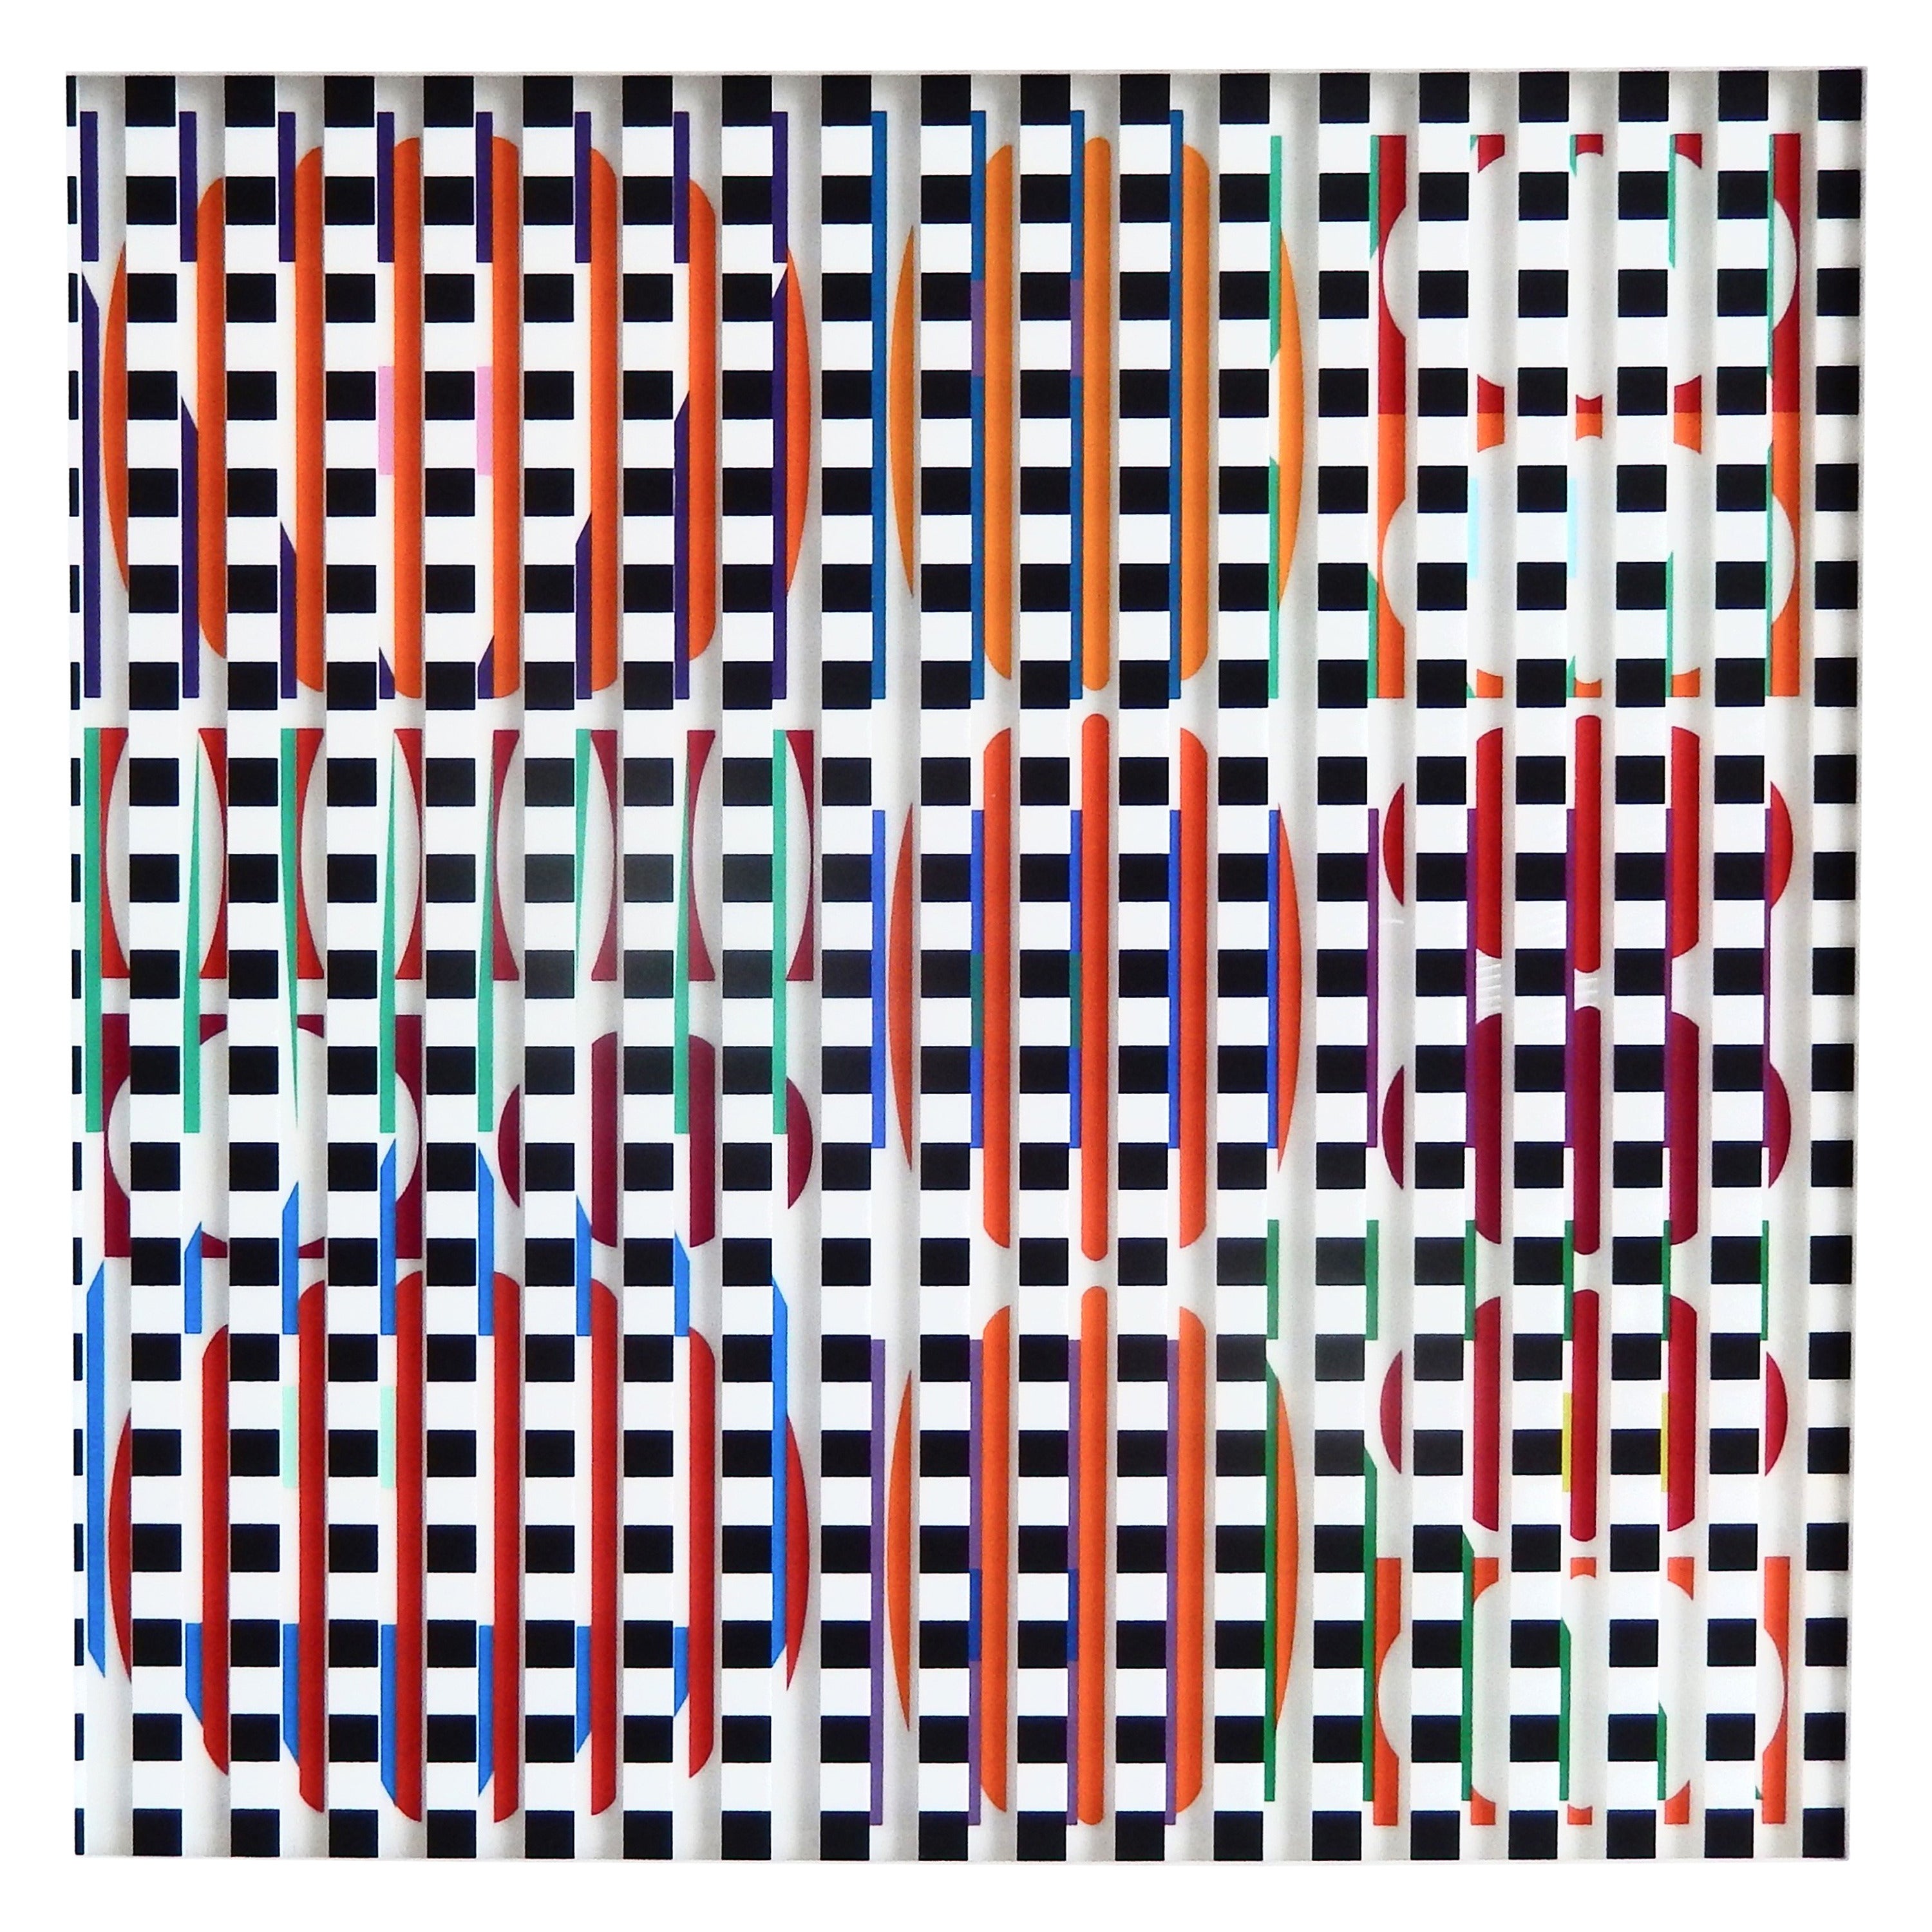 1970s Agam Op Art or Kinetic Polymorph Construction